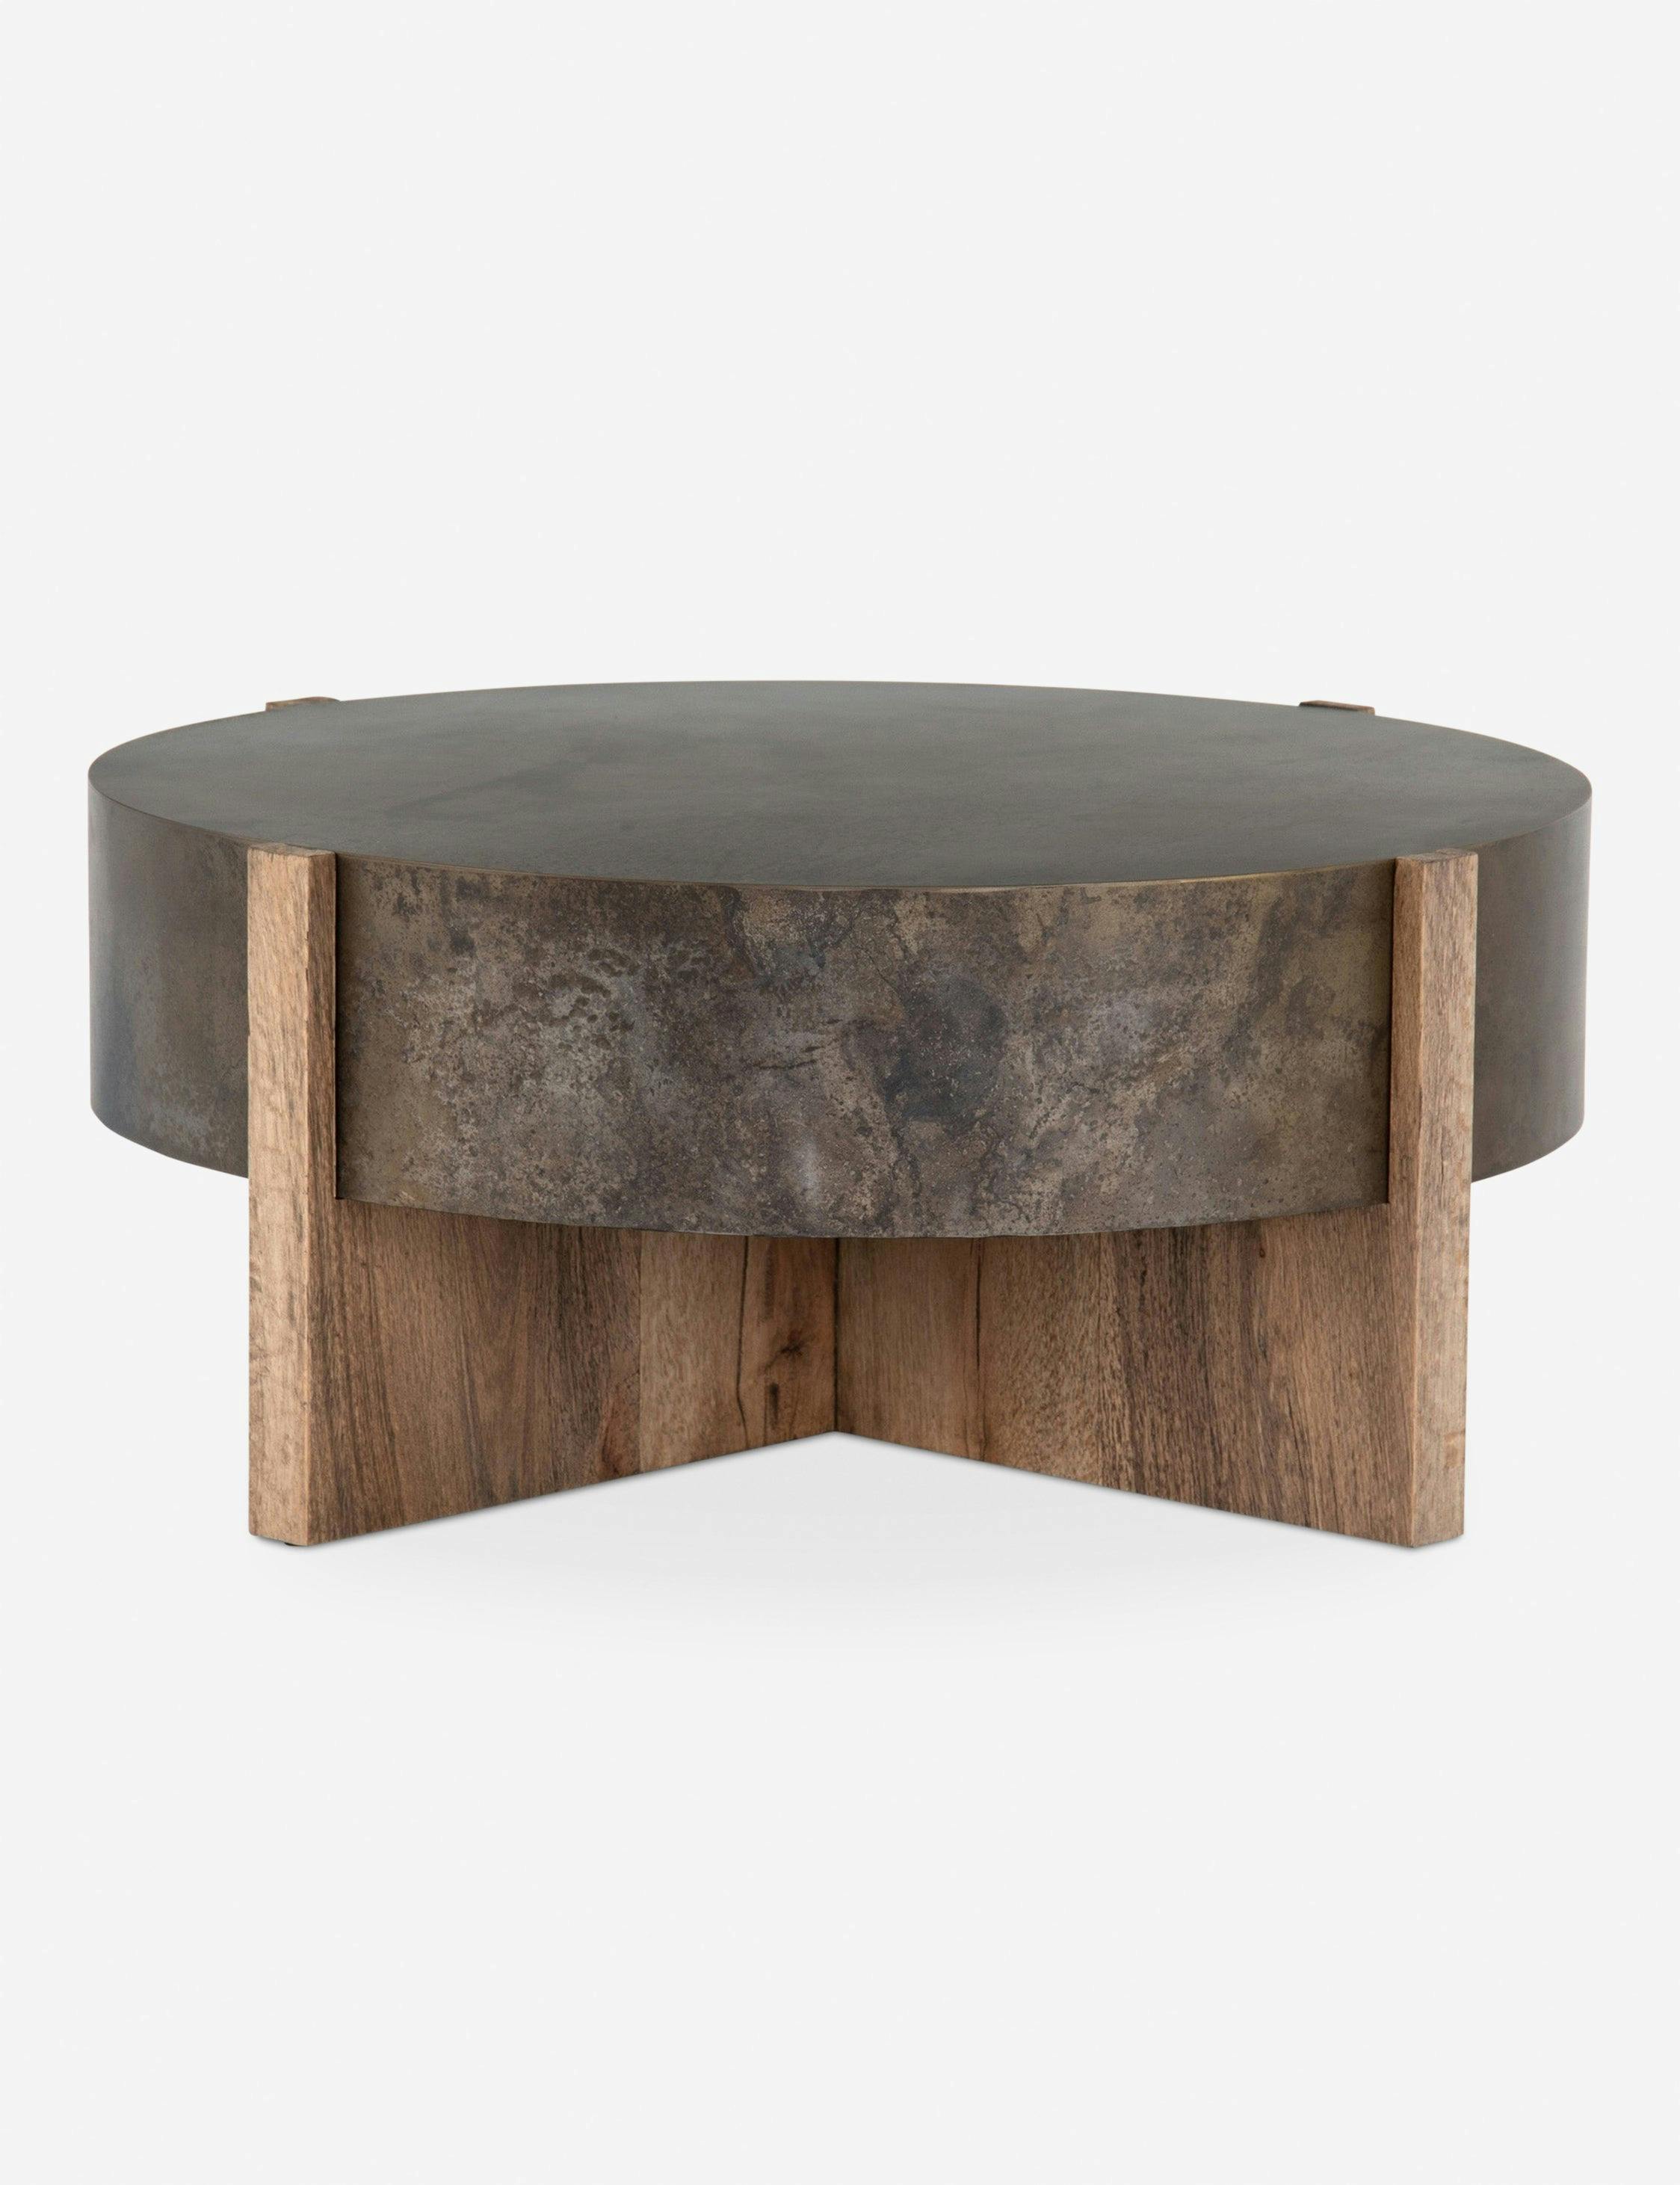 Rustic Oak & Distressed Iron 41.5" Round Coffee Table